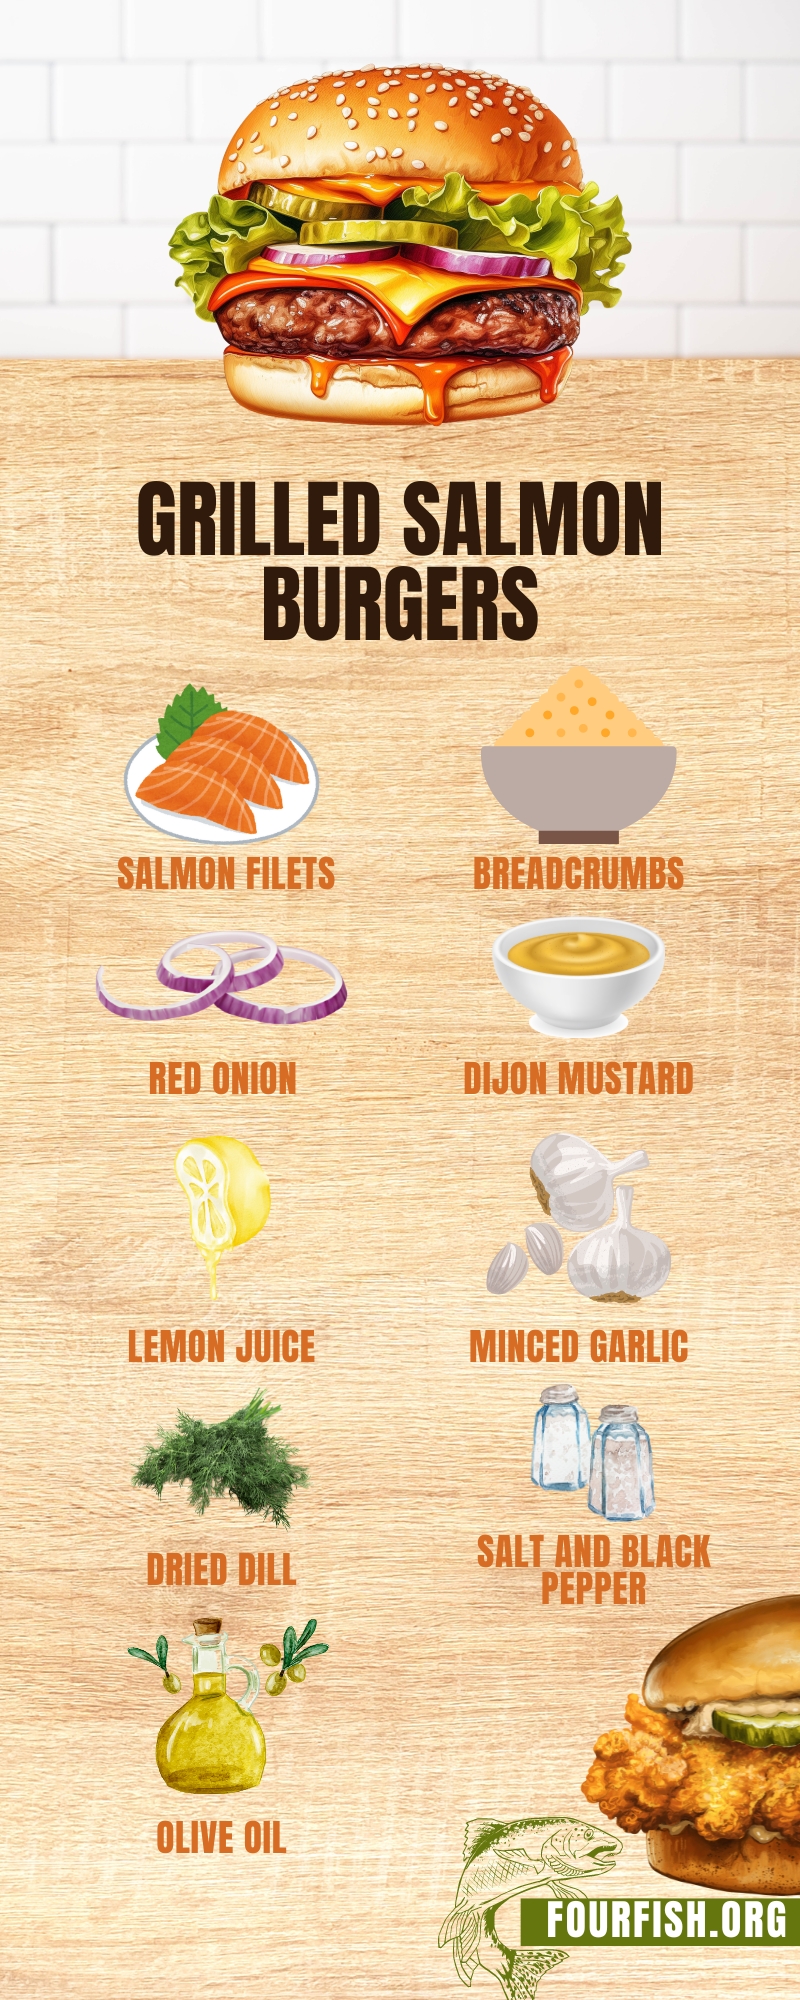 Grilled Salmon Burgers Ingredients Infographic